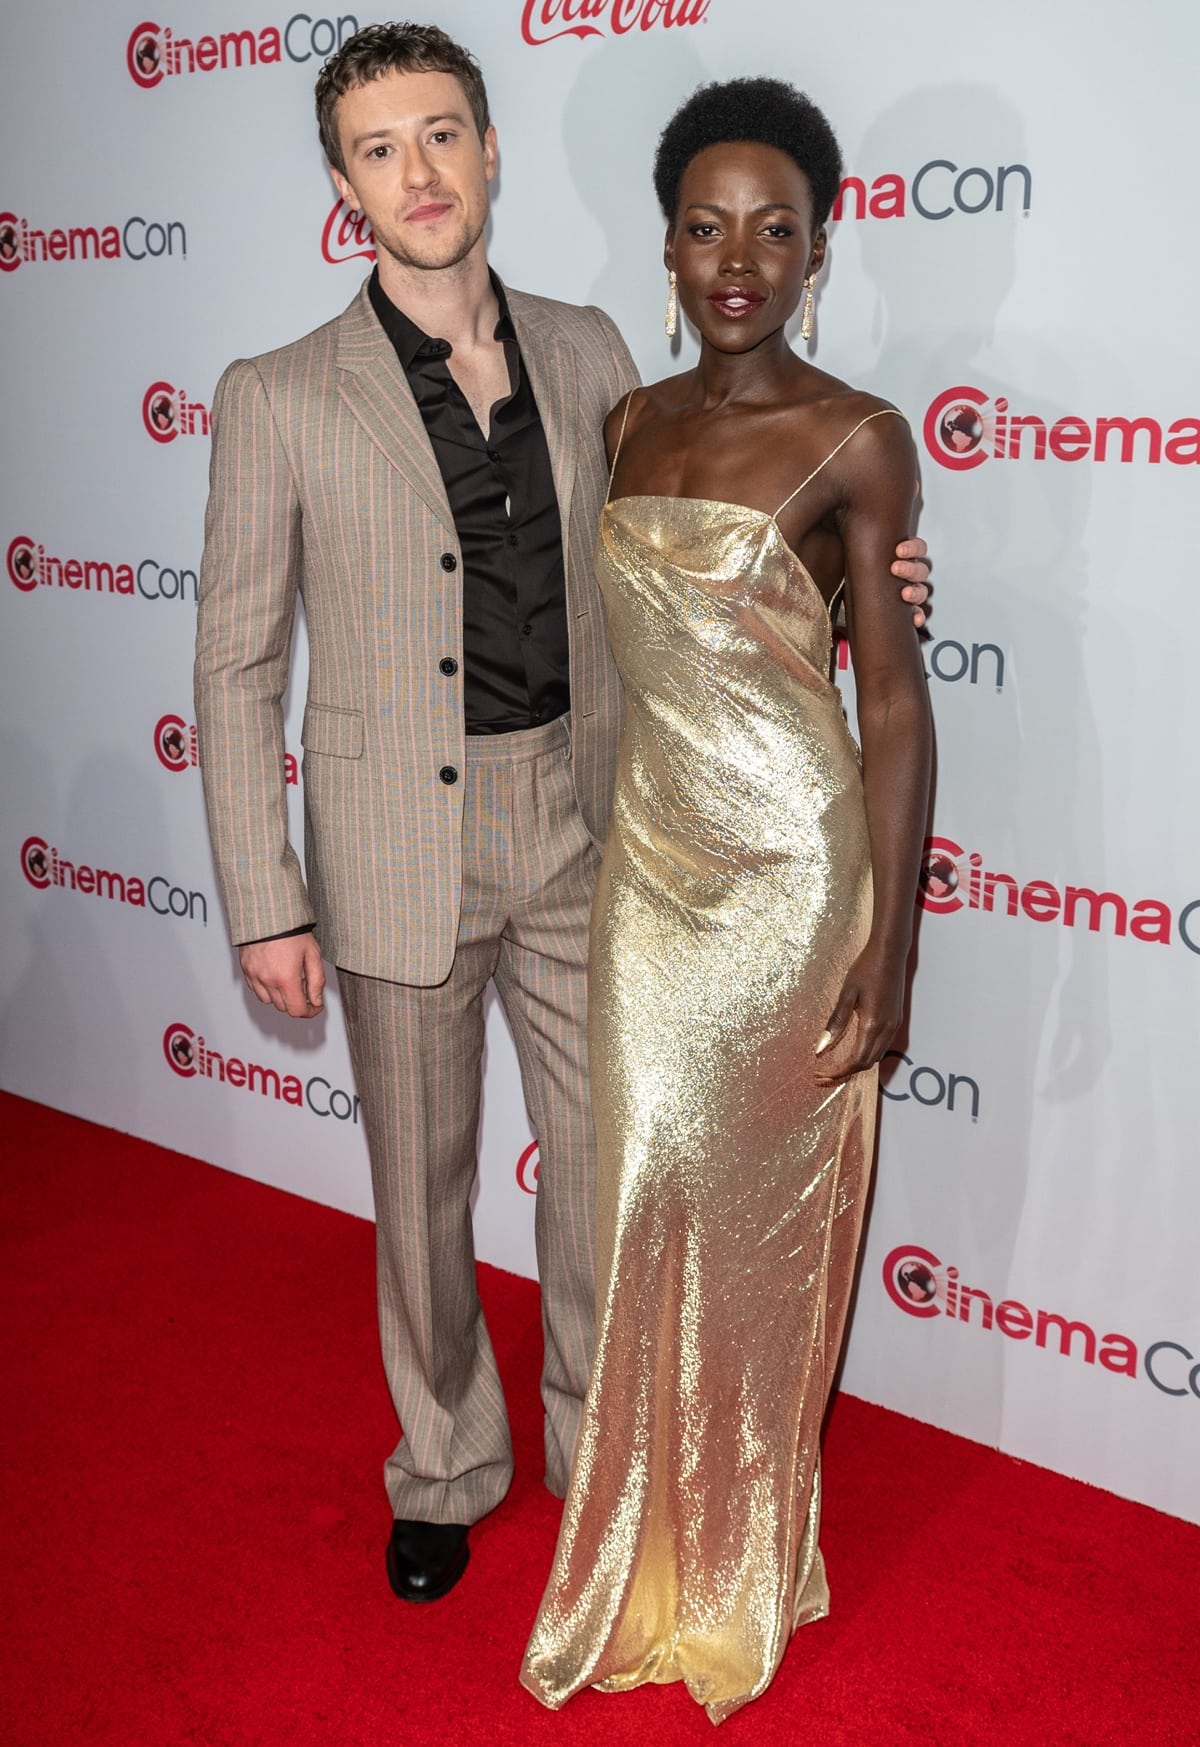 On the red carpet, Lupita Nyong'o, in her high heels, appears almost as tall as Joseph Quinn, despite their height difference, with her at 5ft 3 ¾ inches (161.9 cm) and him at 5ft 10 ¼ inches (178.4 cm)